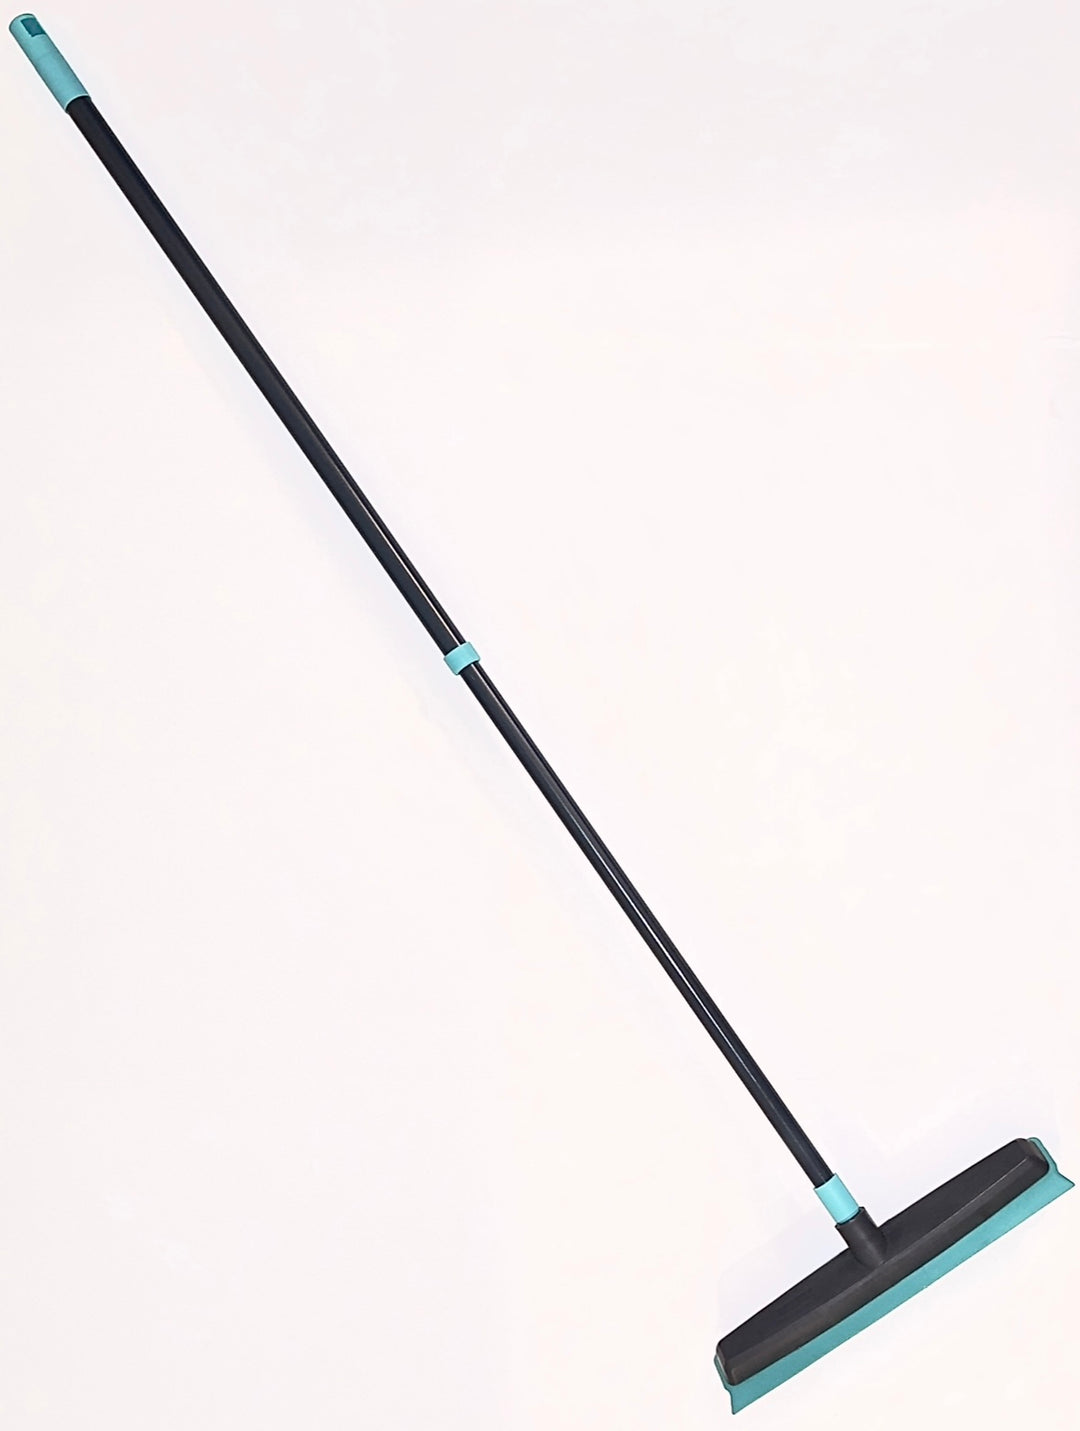 Rubber Broom - All-in-One Cleaning with Rake and Squeegee